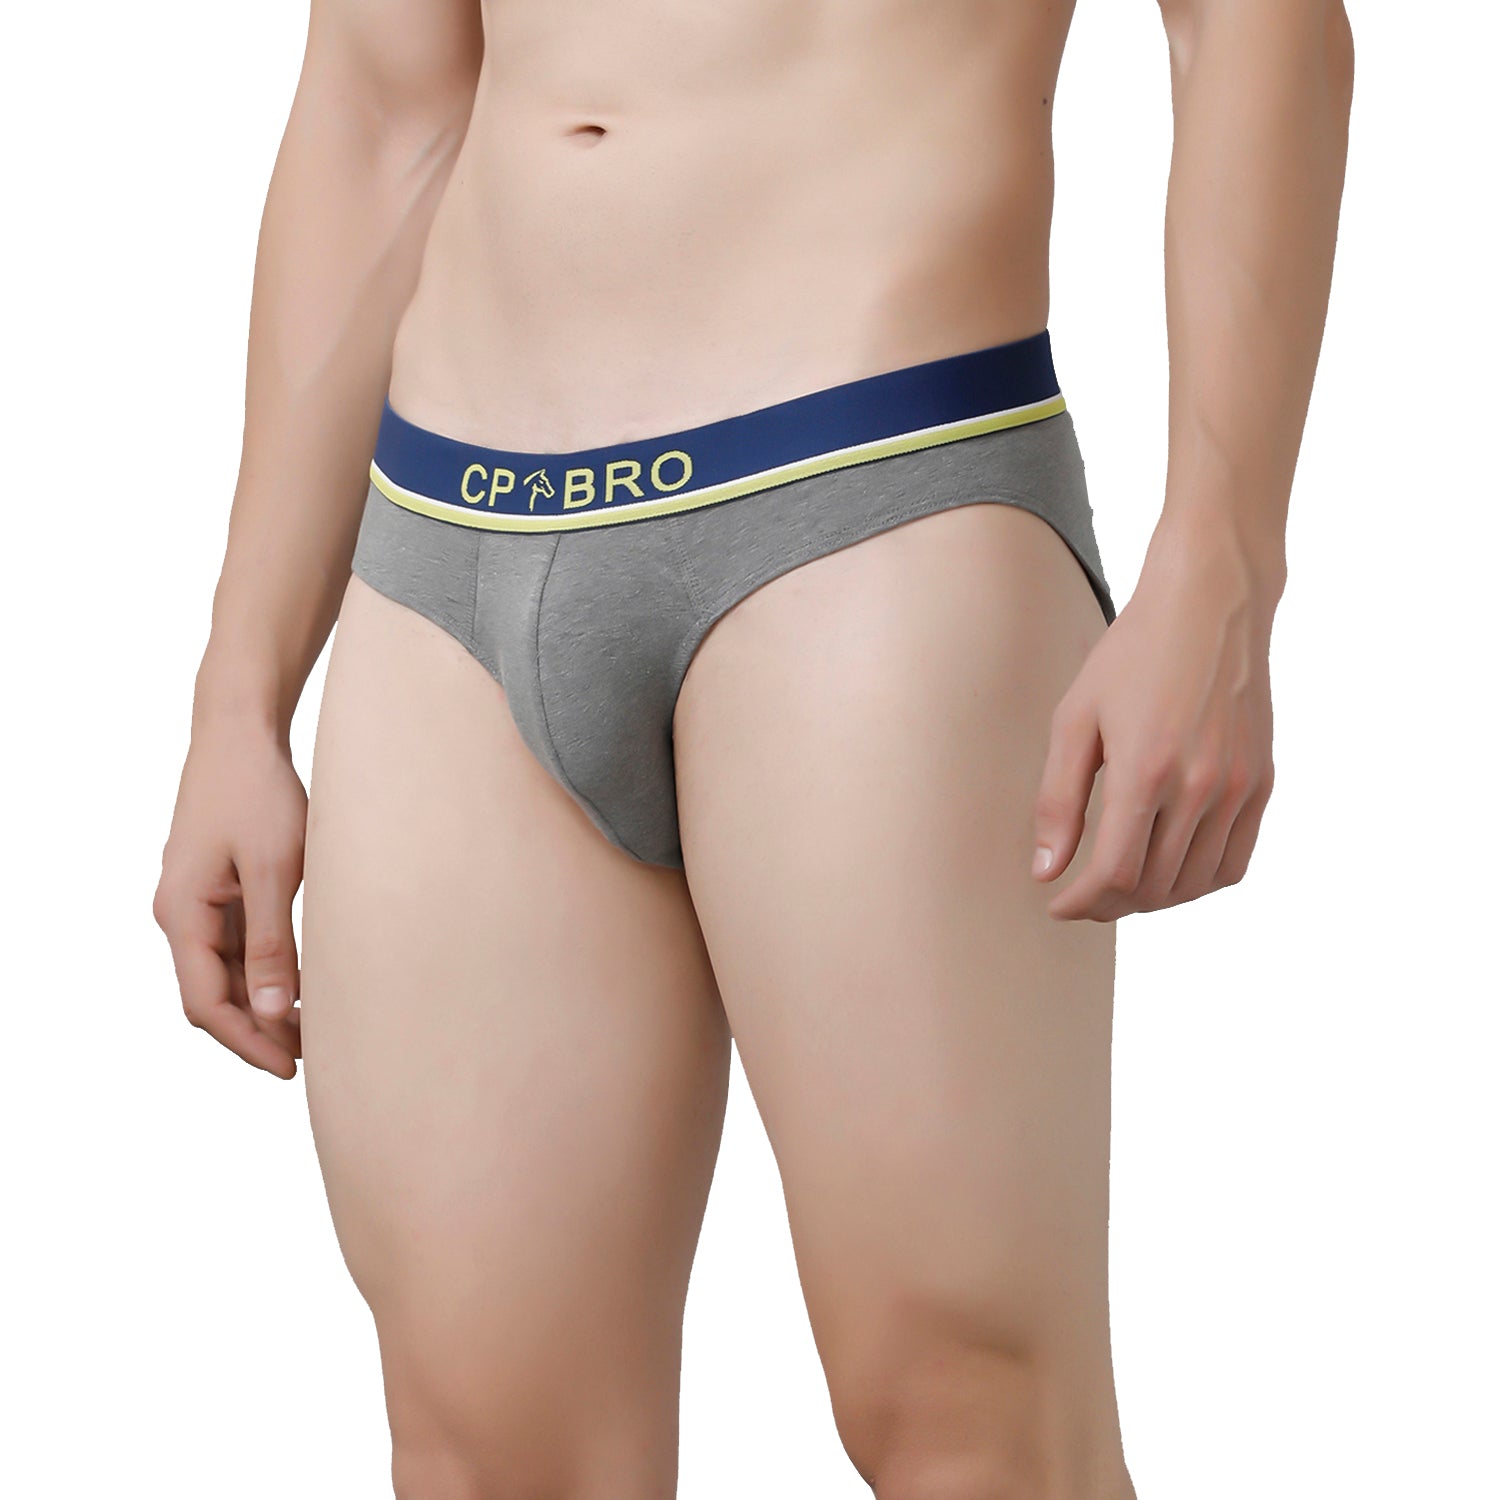 CP BRO Men's Solid Briefs with Exposed Waistband Value Pack - Grey (Pack of 2)